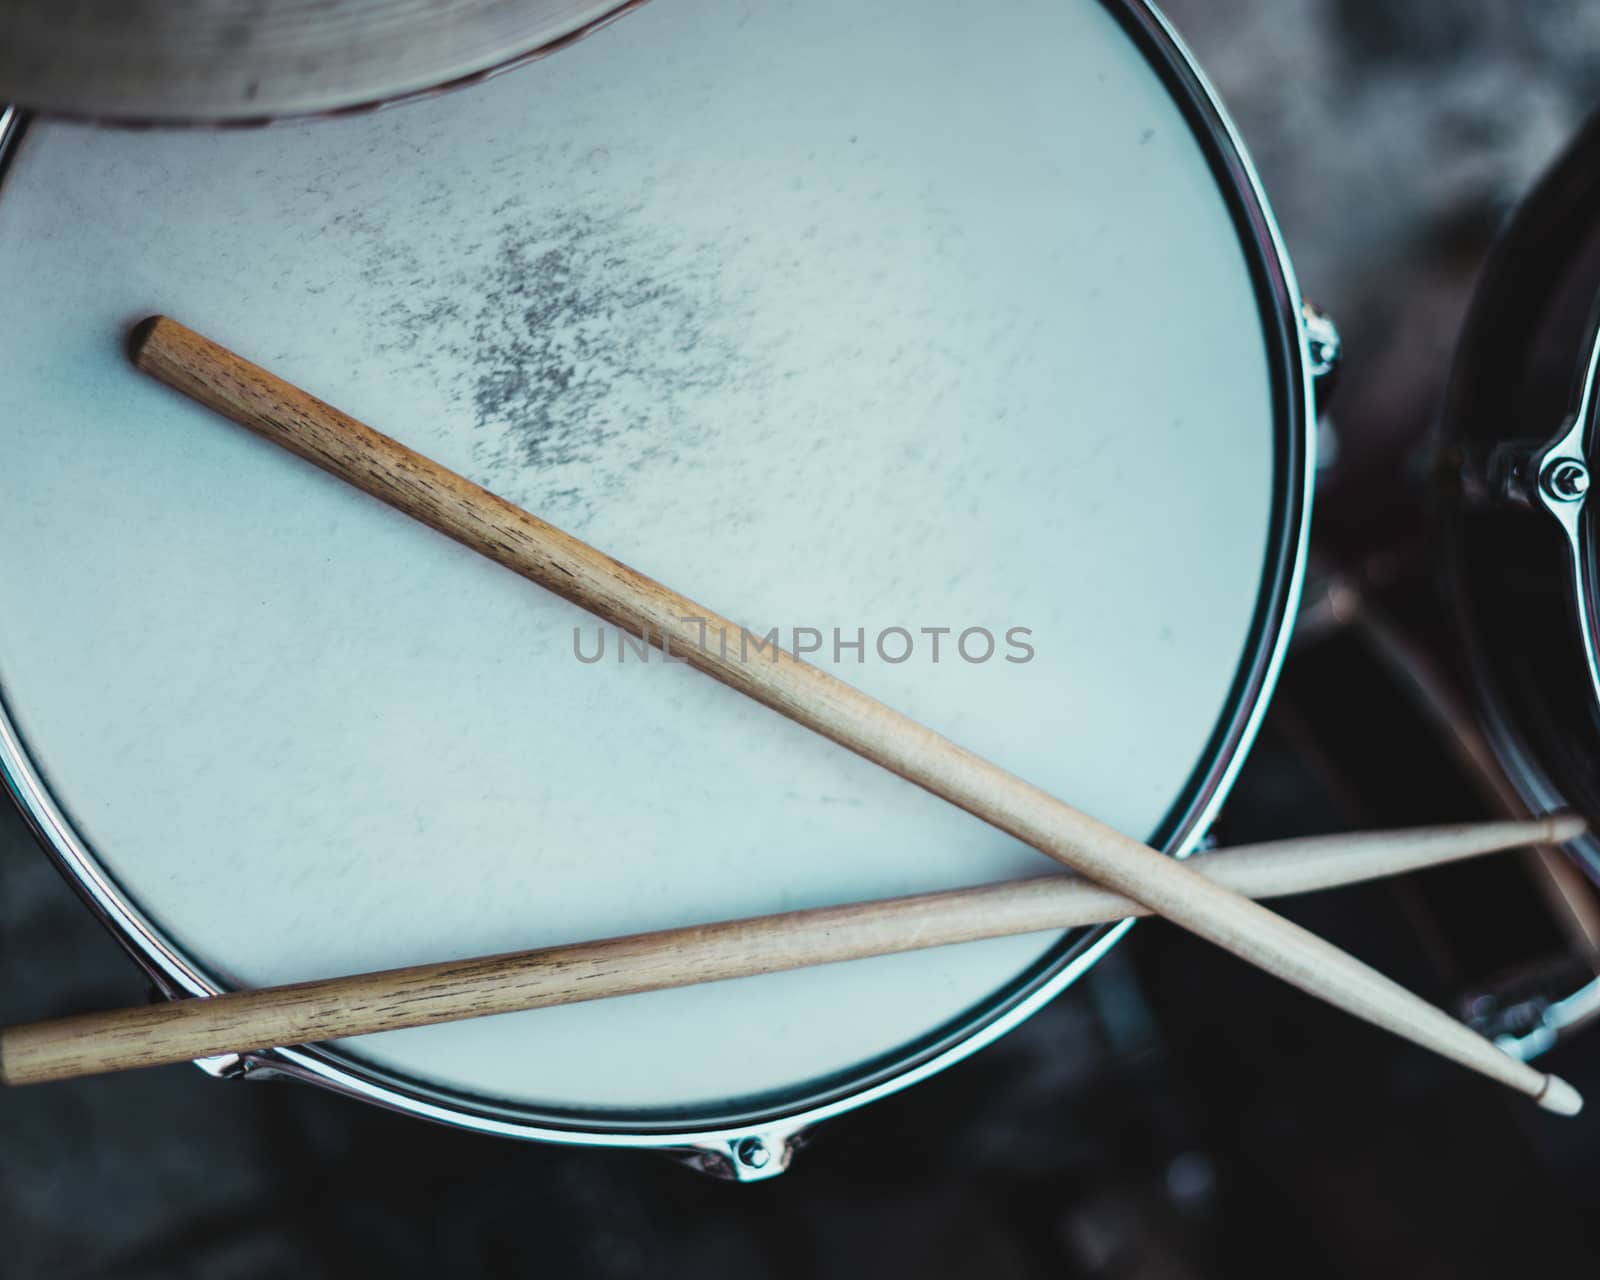 Pretty drummer with drumsticks by Dumblinfilms